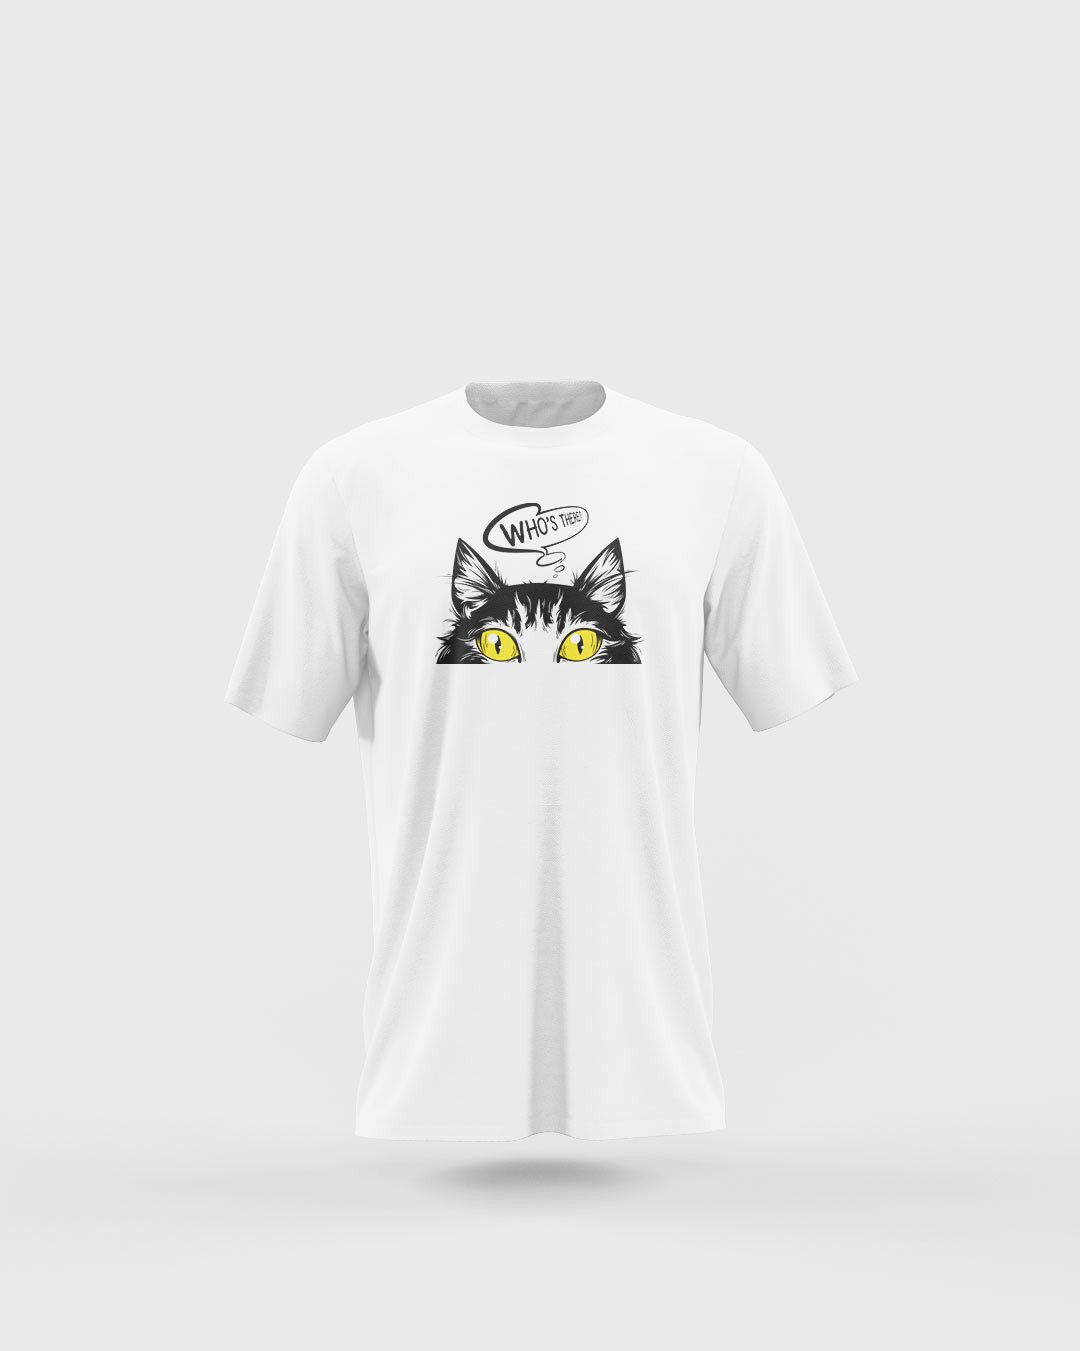 CAT – WHO’S There Printed T-Shirts